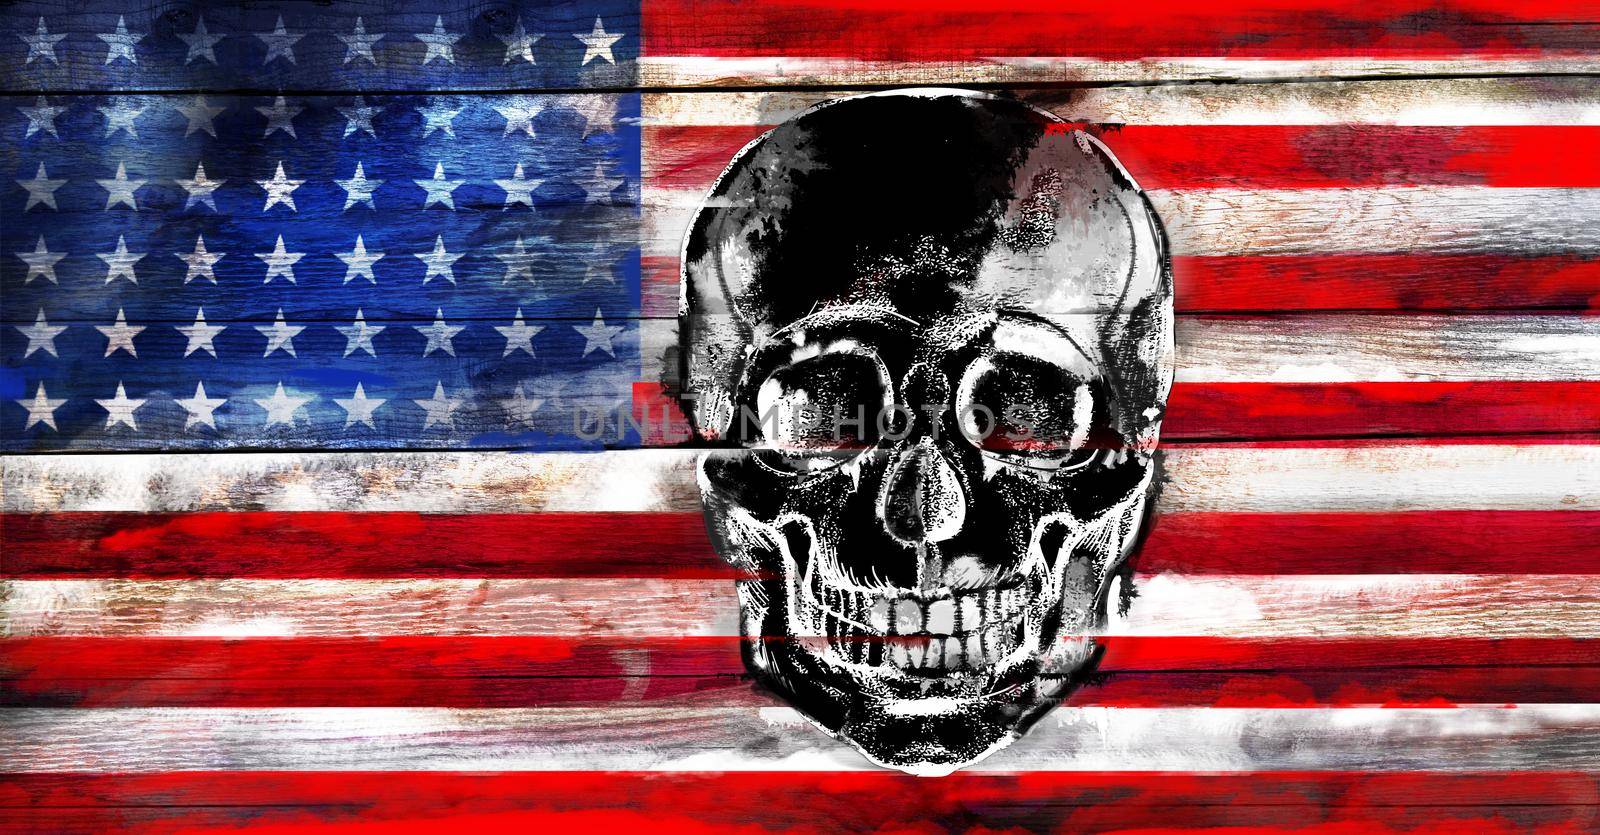 American flag with a human skull on a wood surface background.